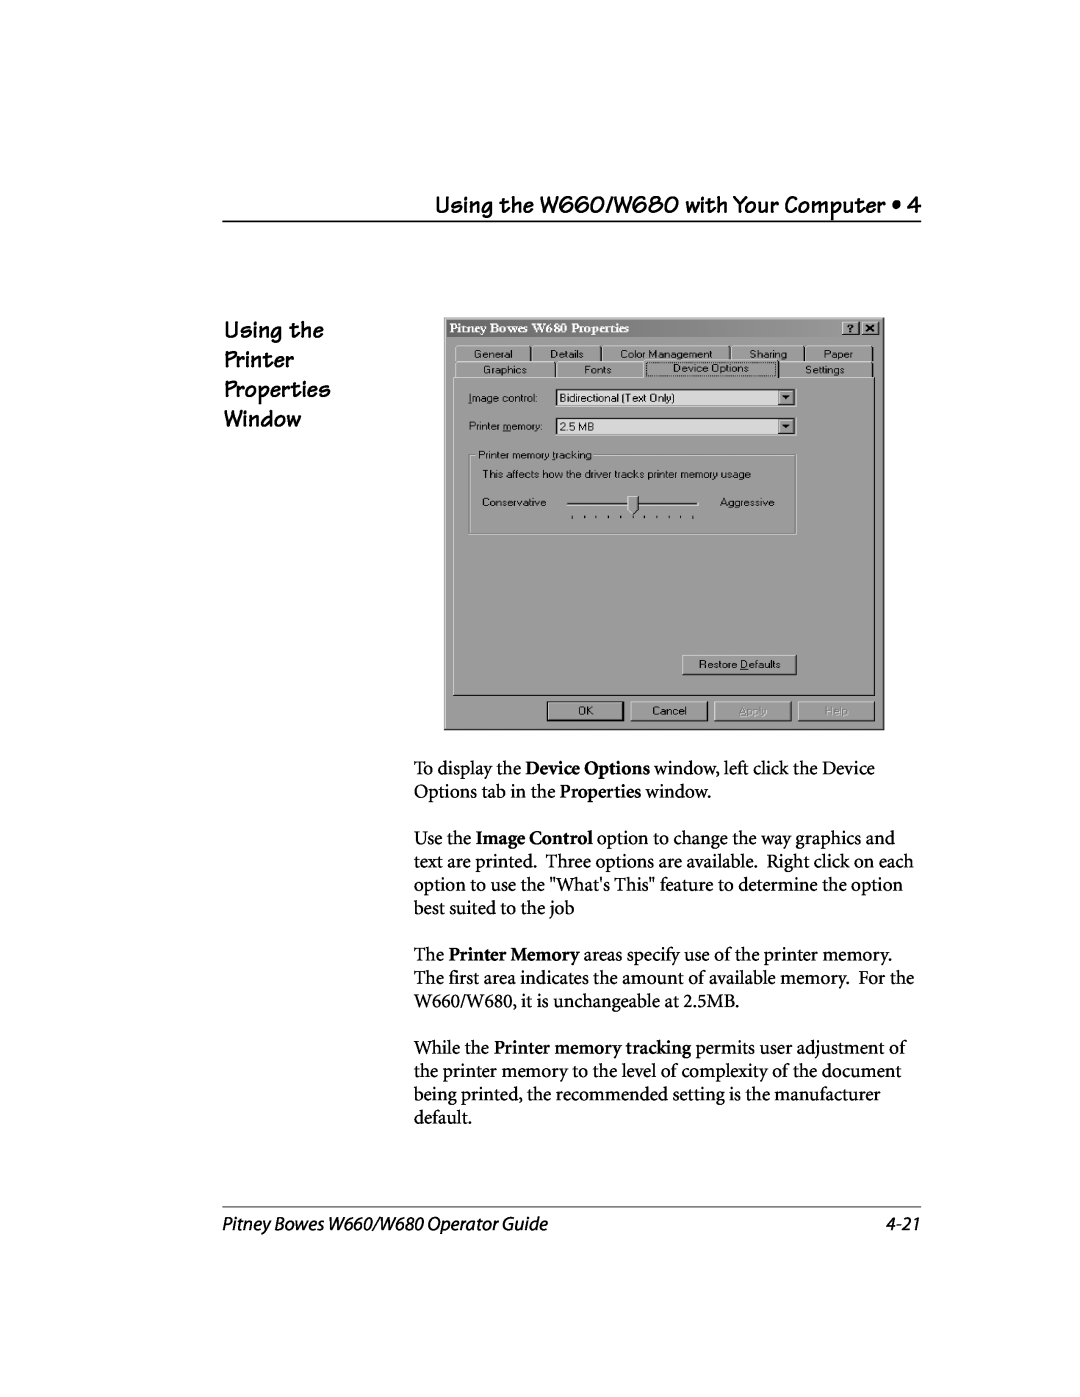 Pitney Bowes manual 4-21, Using the W660/W680 with Your Computer Using the Printer Properties, Window 